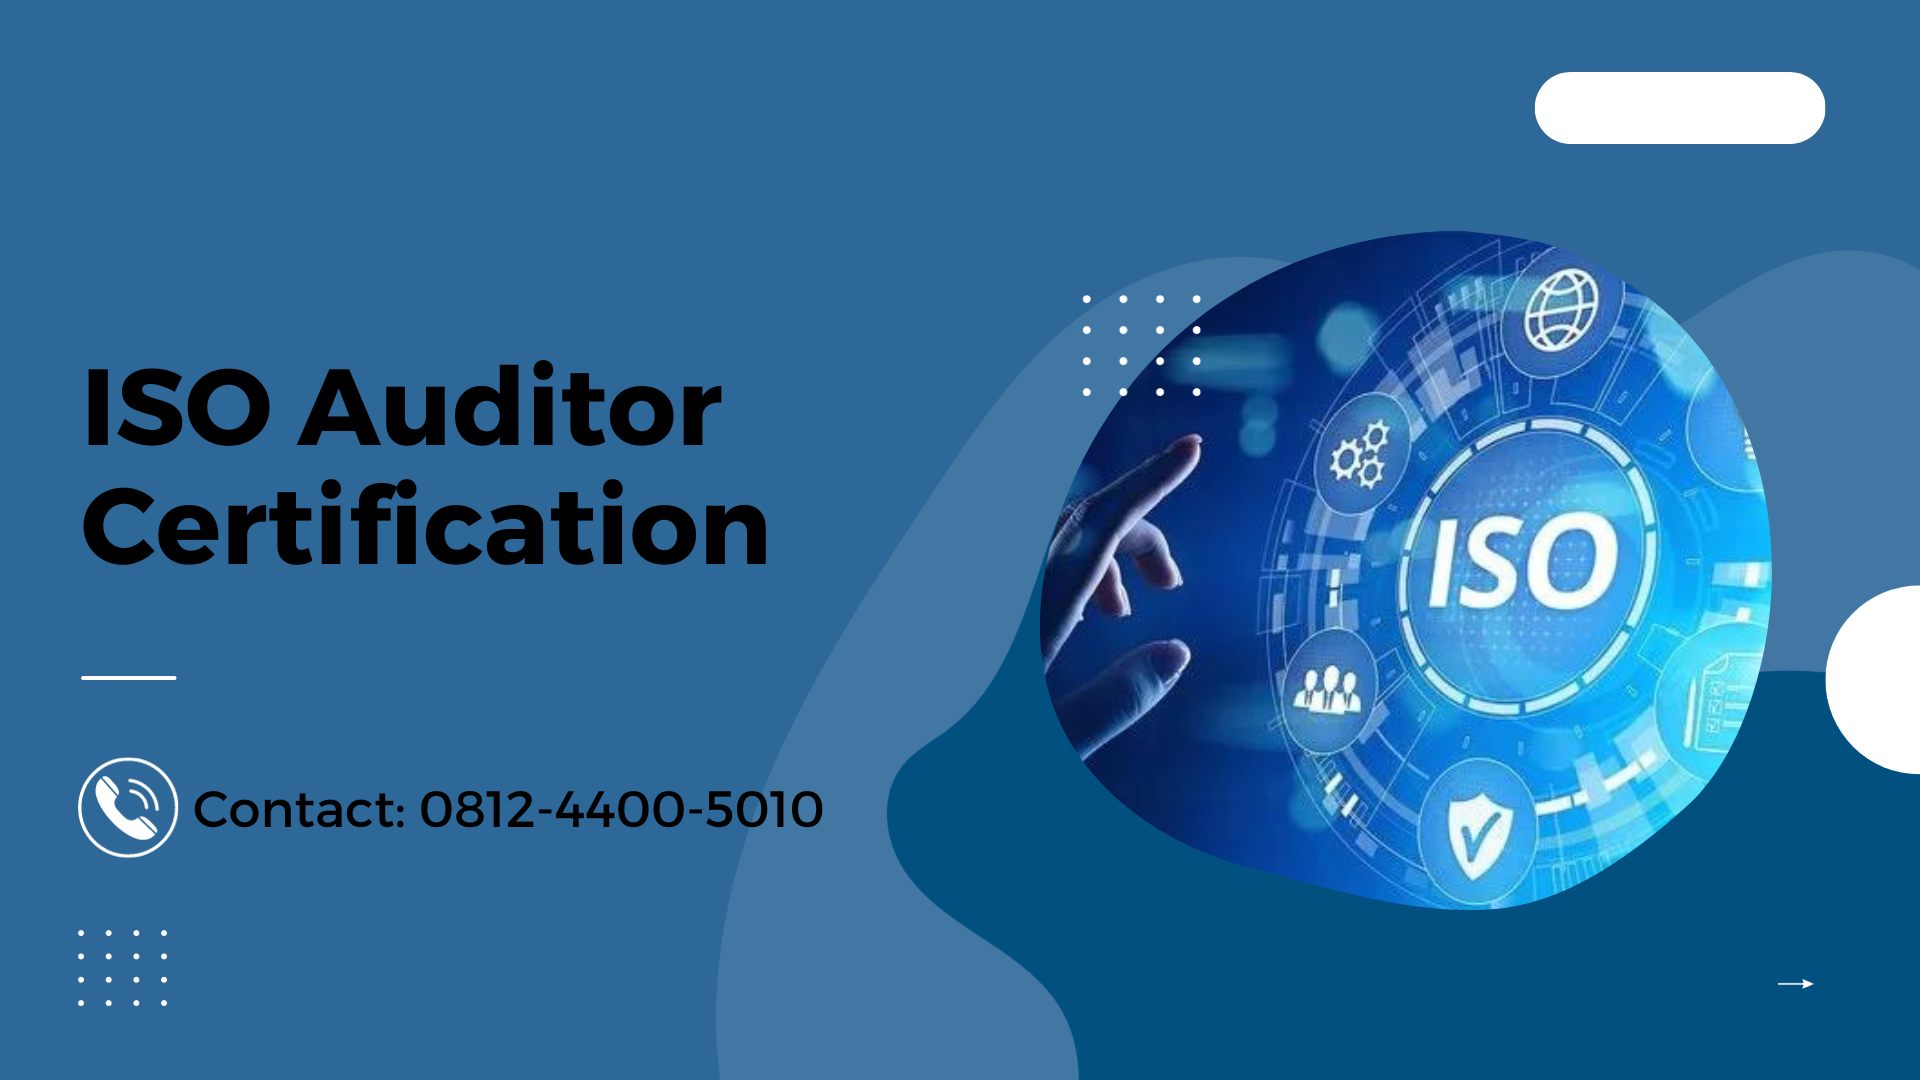 ISO Auditor Certification